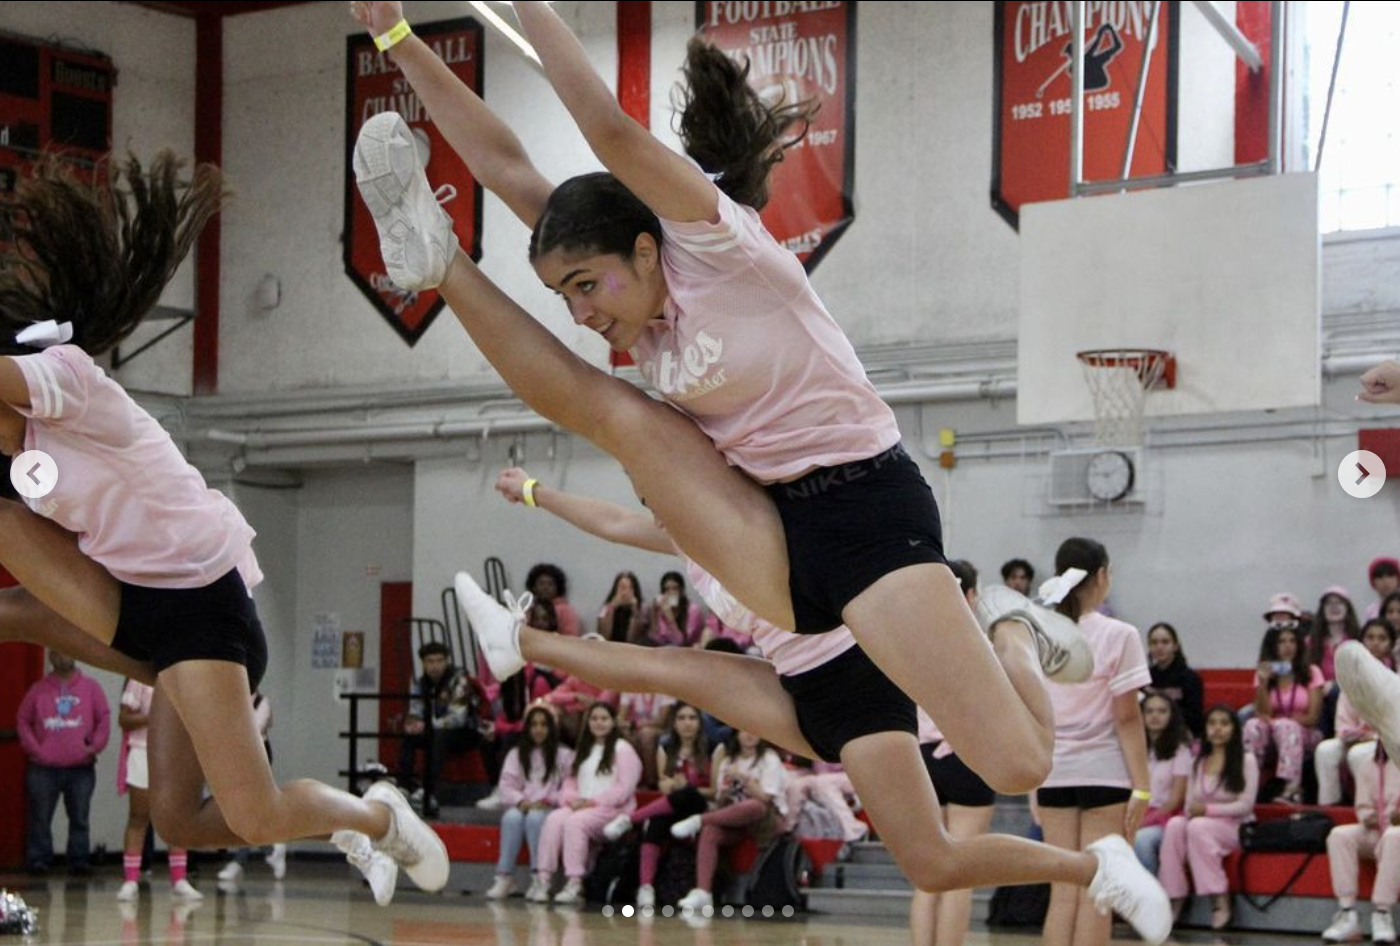 The Gablettes fly into the air as they execute their Pink pep rally perfomance.